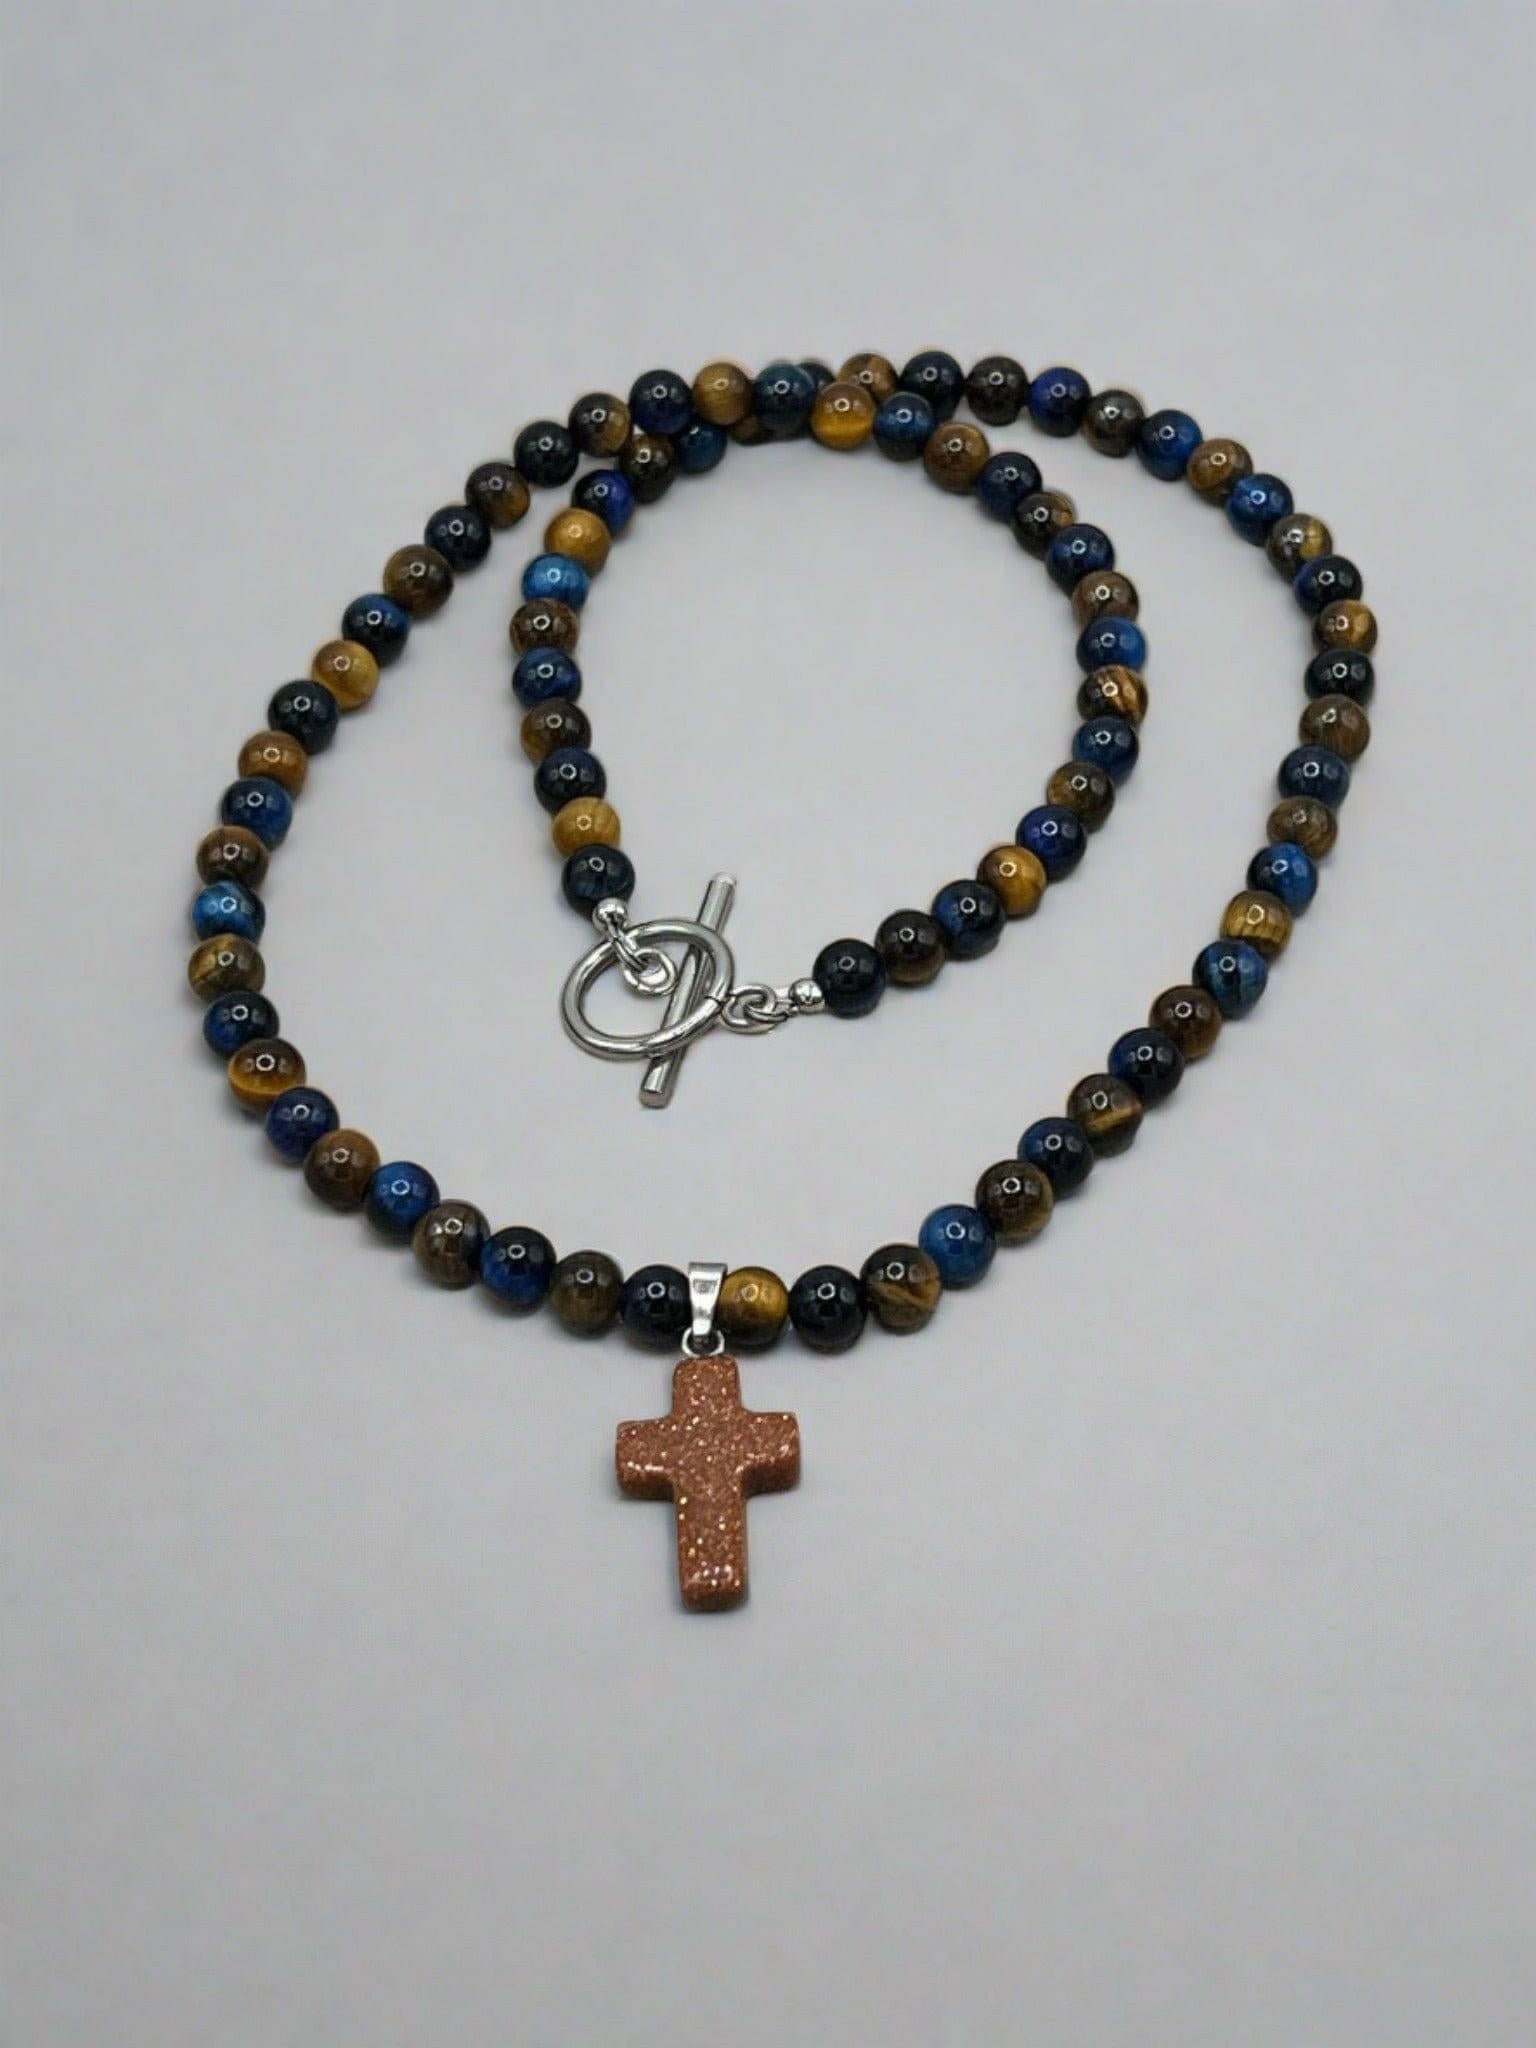 Bec Sue Jewelry Shop Necklaces Tiger's eye / 19 / yellow/blue Handmade Unique Tiger Eye Cross Necklace Tags 506-2